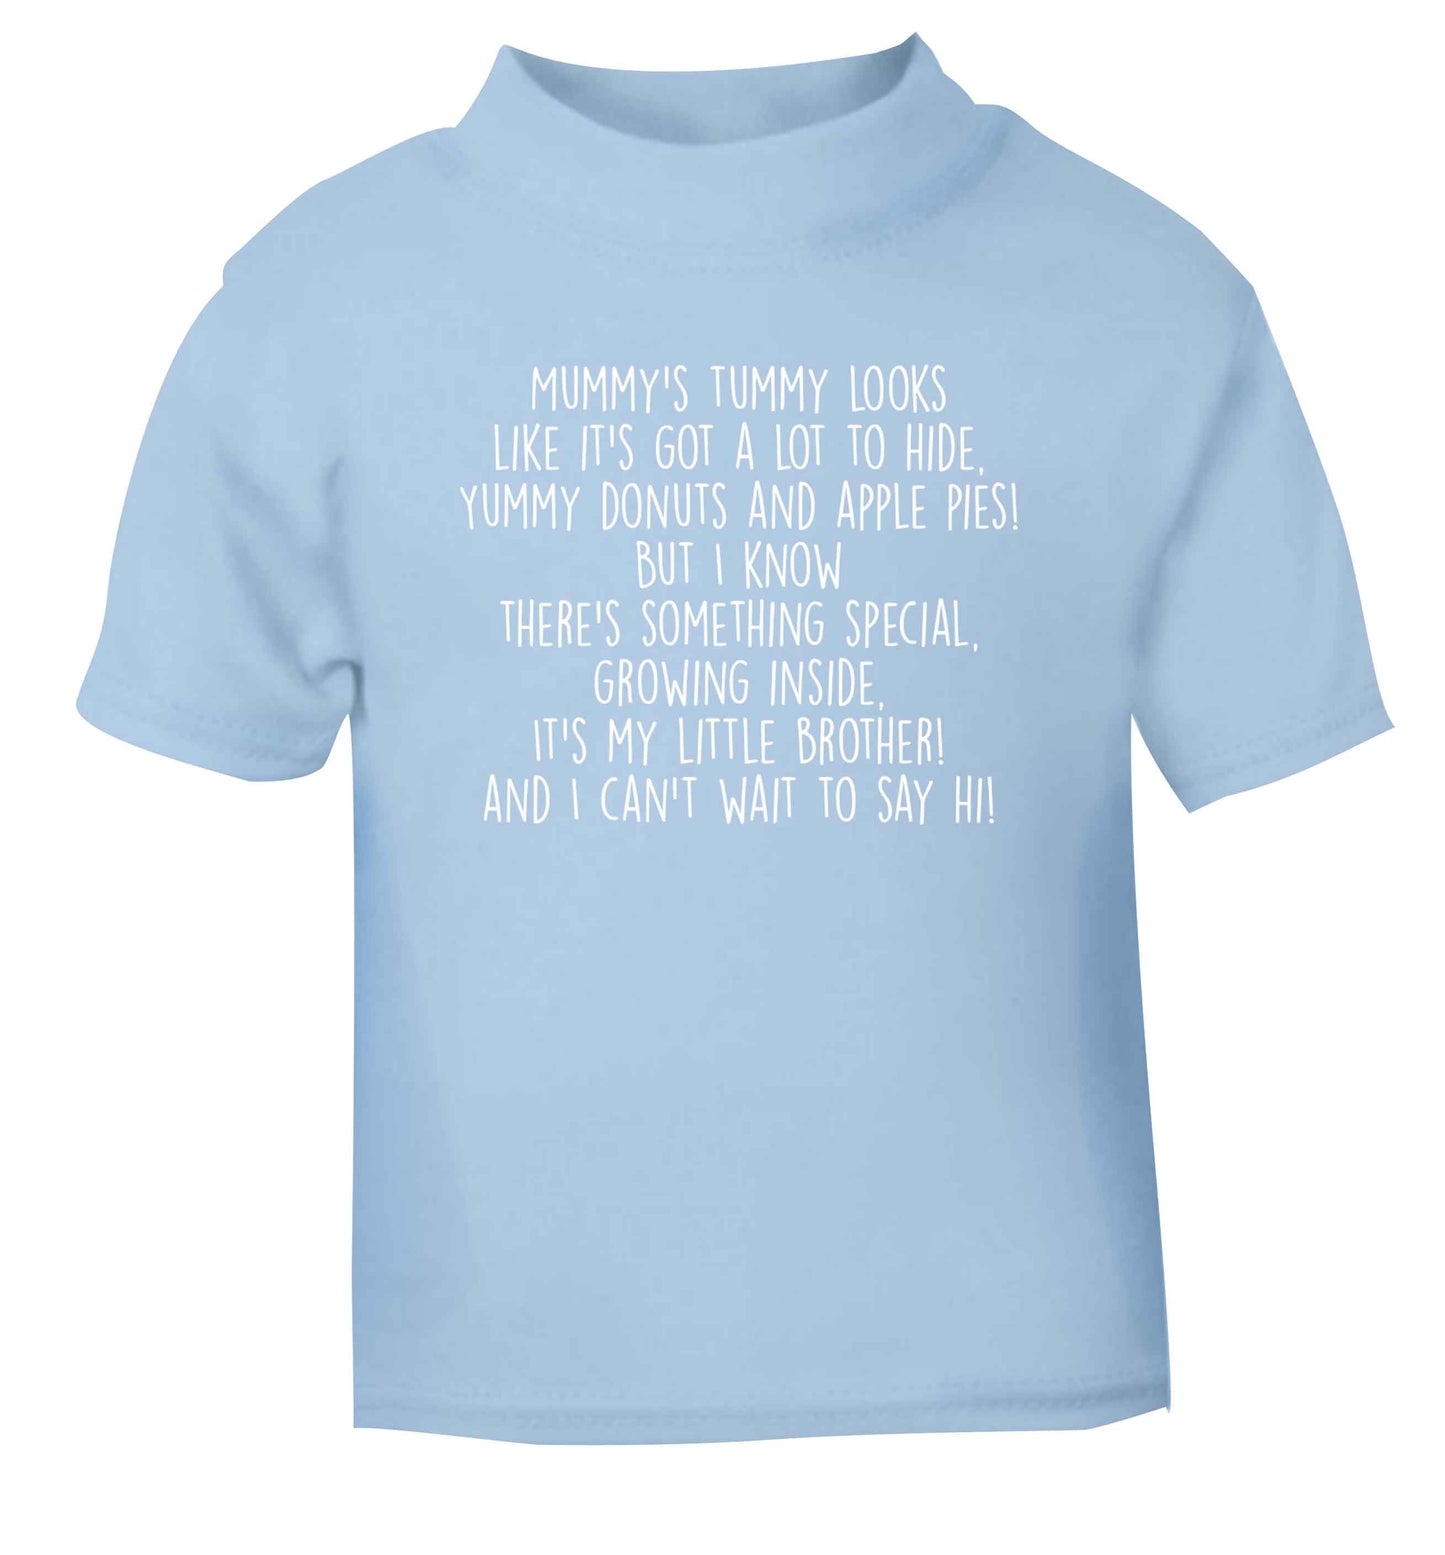 Something special growing inside it's my little brother I can't wait to say hi! light blue Baby Toddler Tshirt 2 Years